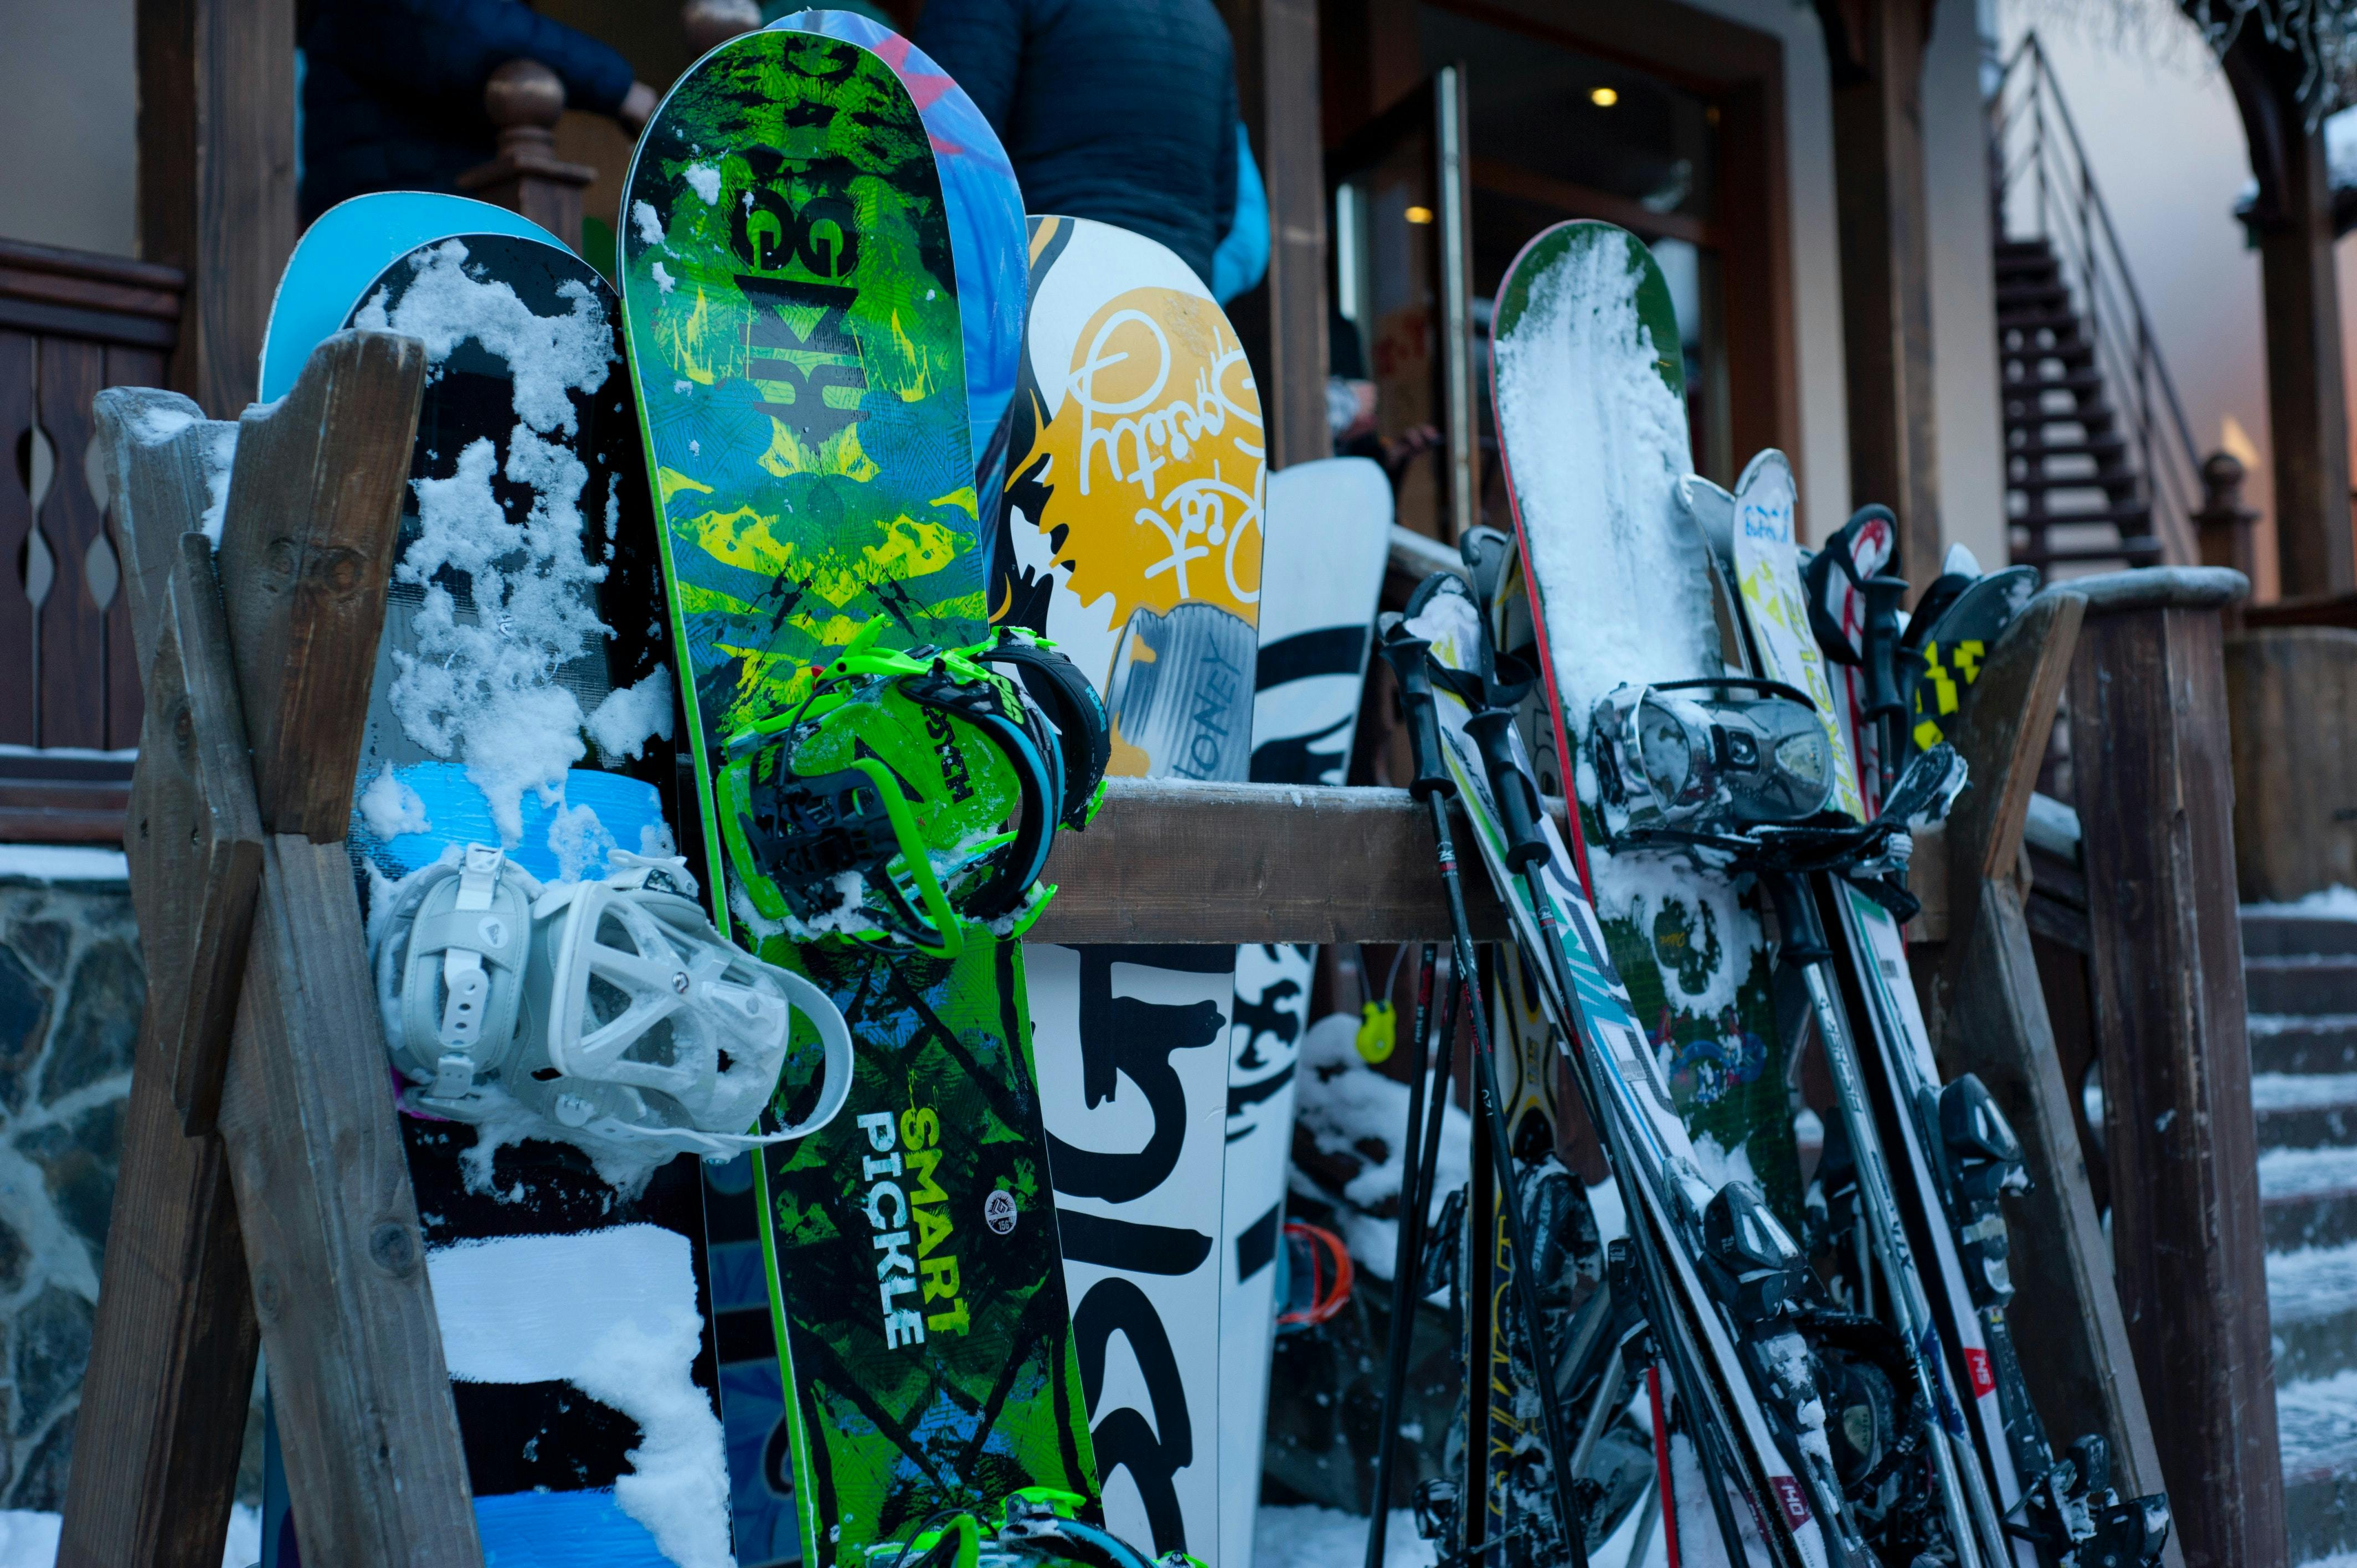 Snowboards on rack outside a lodge.